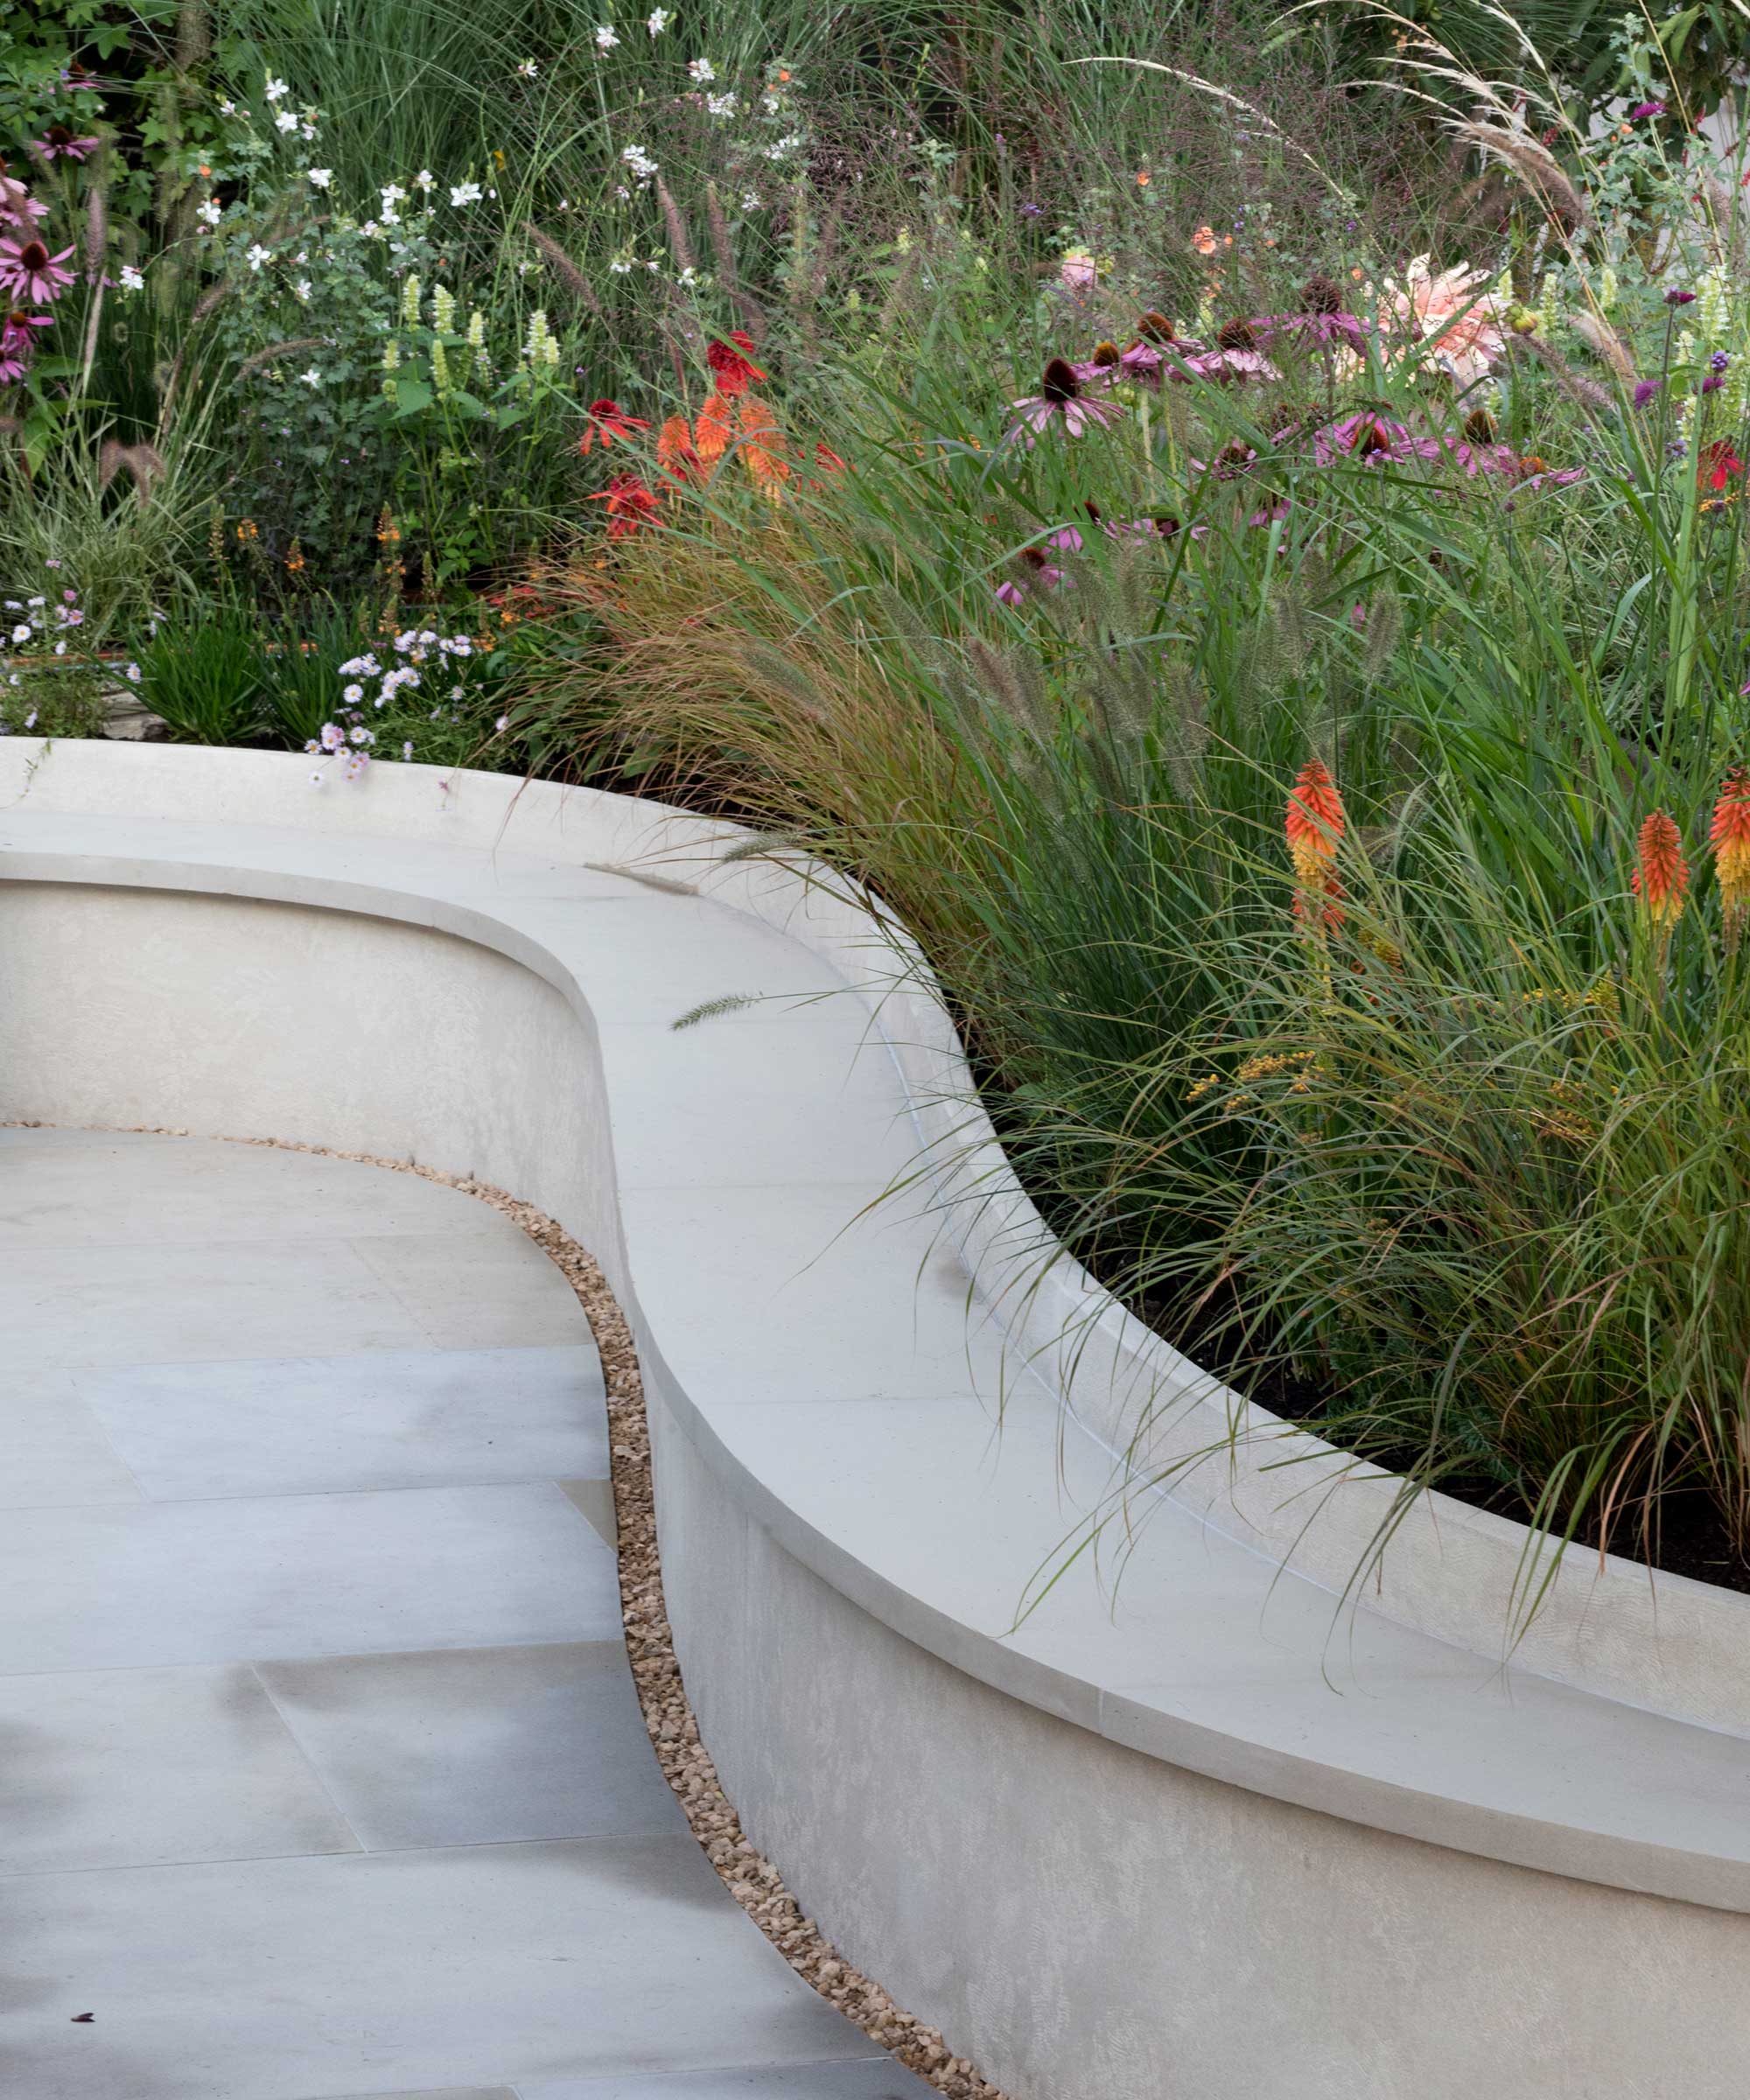 pebbles alongside paving and raised beds with flowers at Finding Our Way – An NHS Tribute Garden by Naomi Ferrett-Cohen at Chelsea flower show 2021